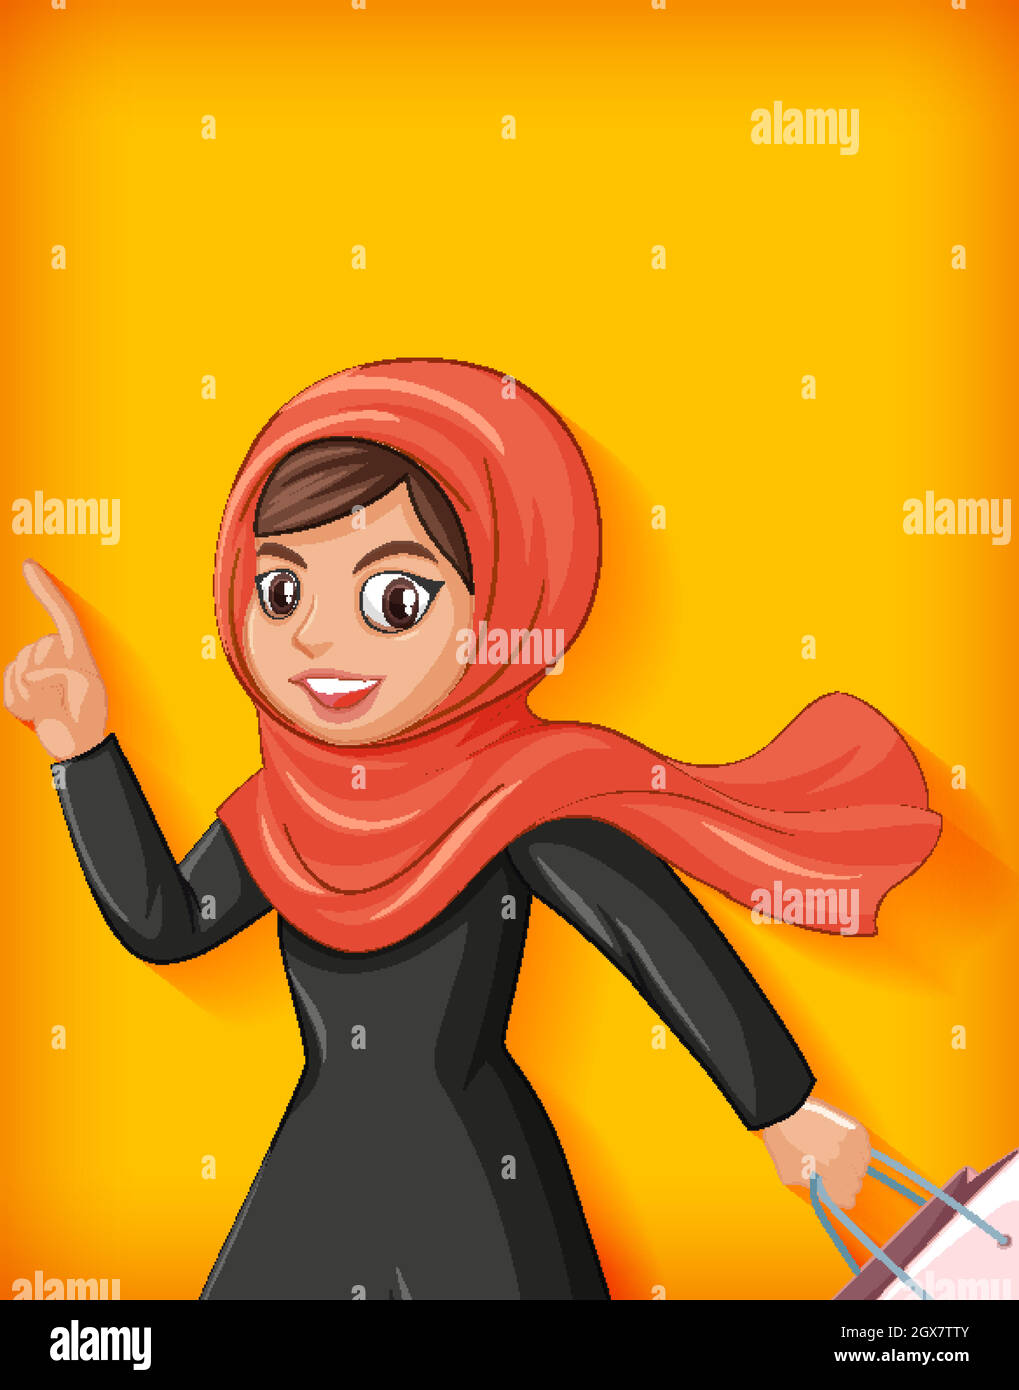 Arab shopping people Stock Vector Images - Alamy